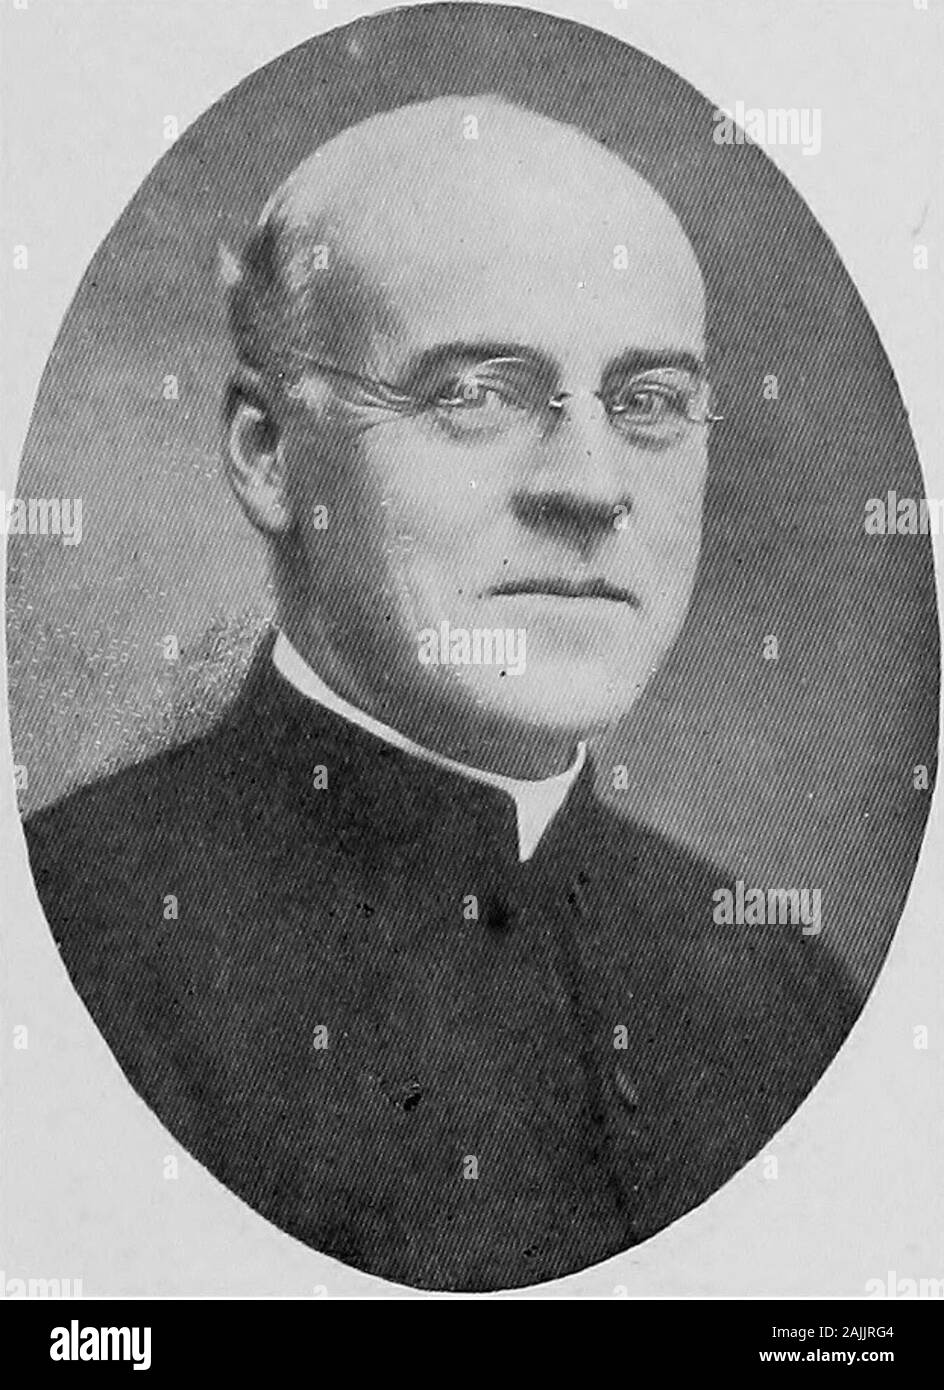 Empire state notables, 1914 . Empire State Notables THE CLEHGY 107. REV. WILLIAM J. McCLURE Rector of the ChurcH of the Immaculate Conception of the Blessed Virgin Mary Stapleton, S. I., N. Y. REV. JOS. HENRY ROCKWELL, S. J. President College of St. Francis Xavier New Yorl; City Stock Photo